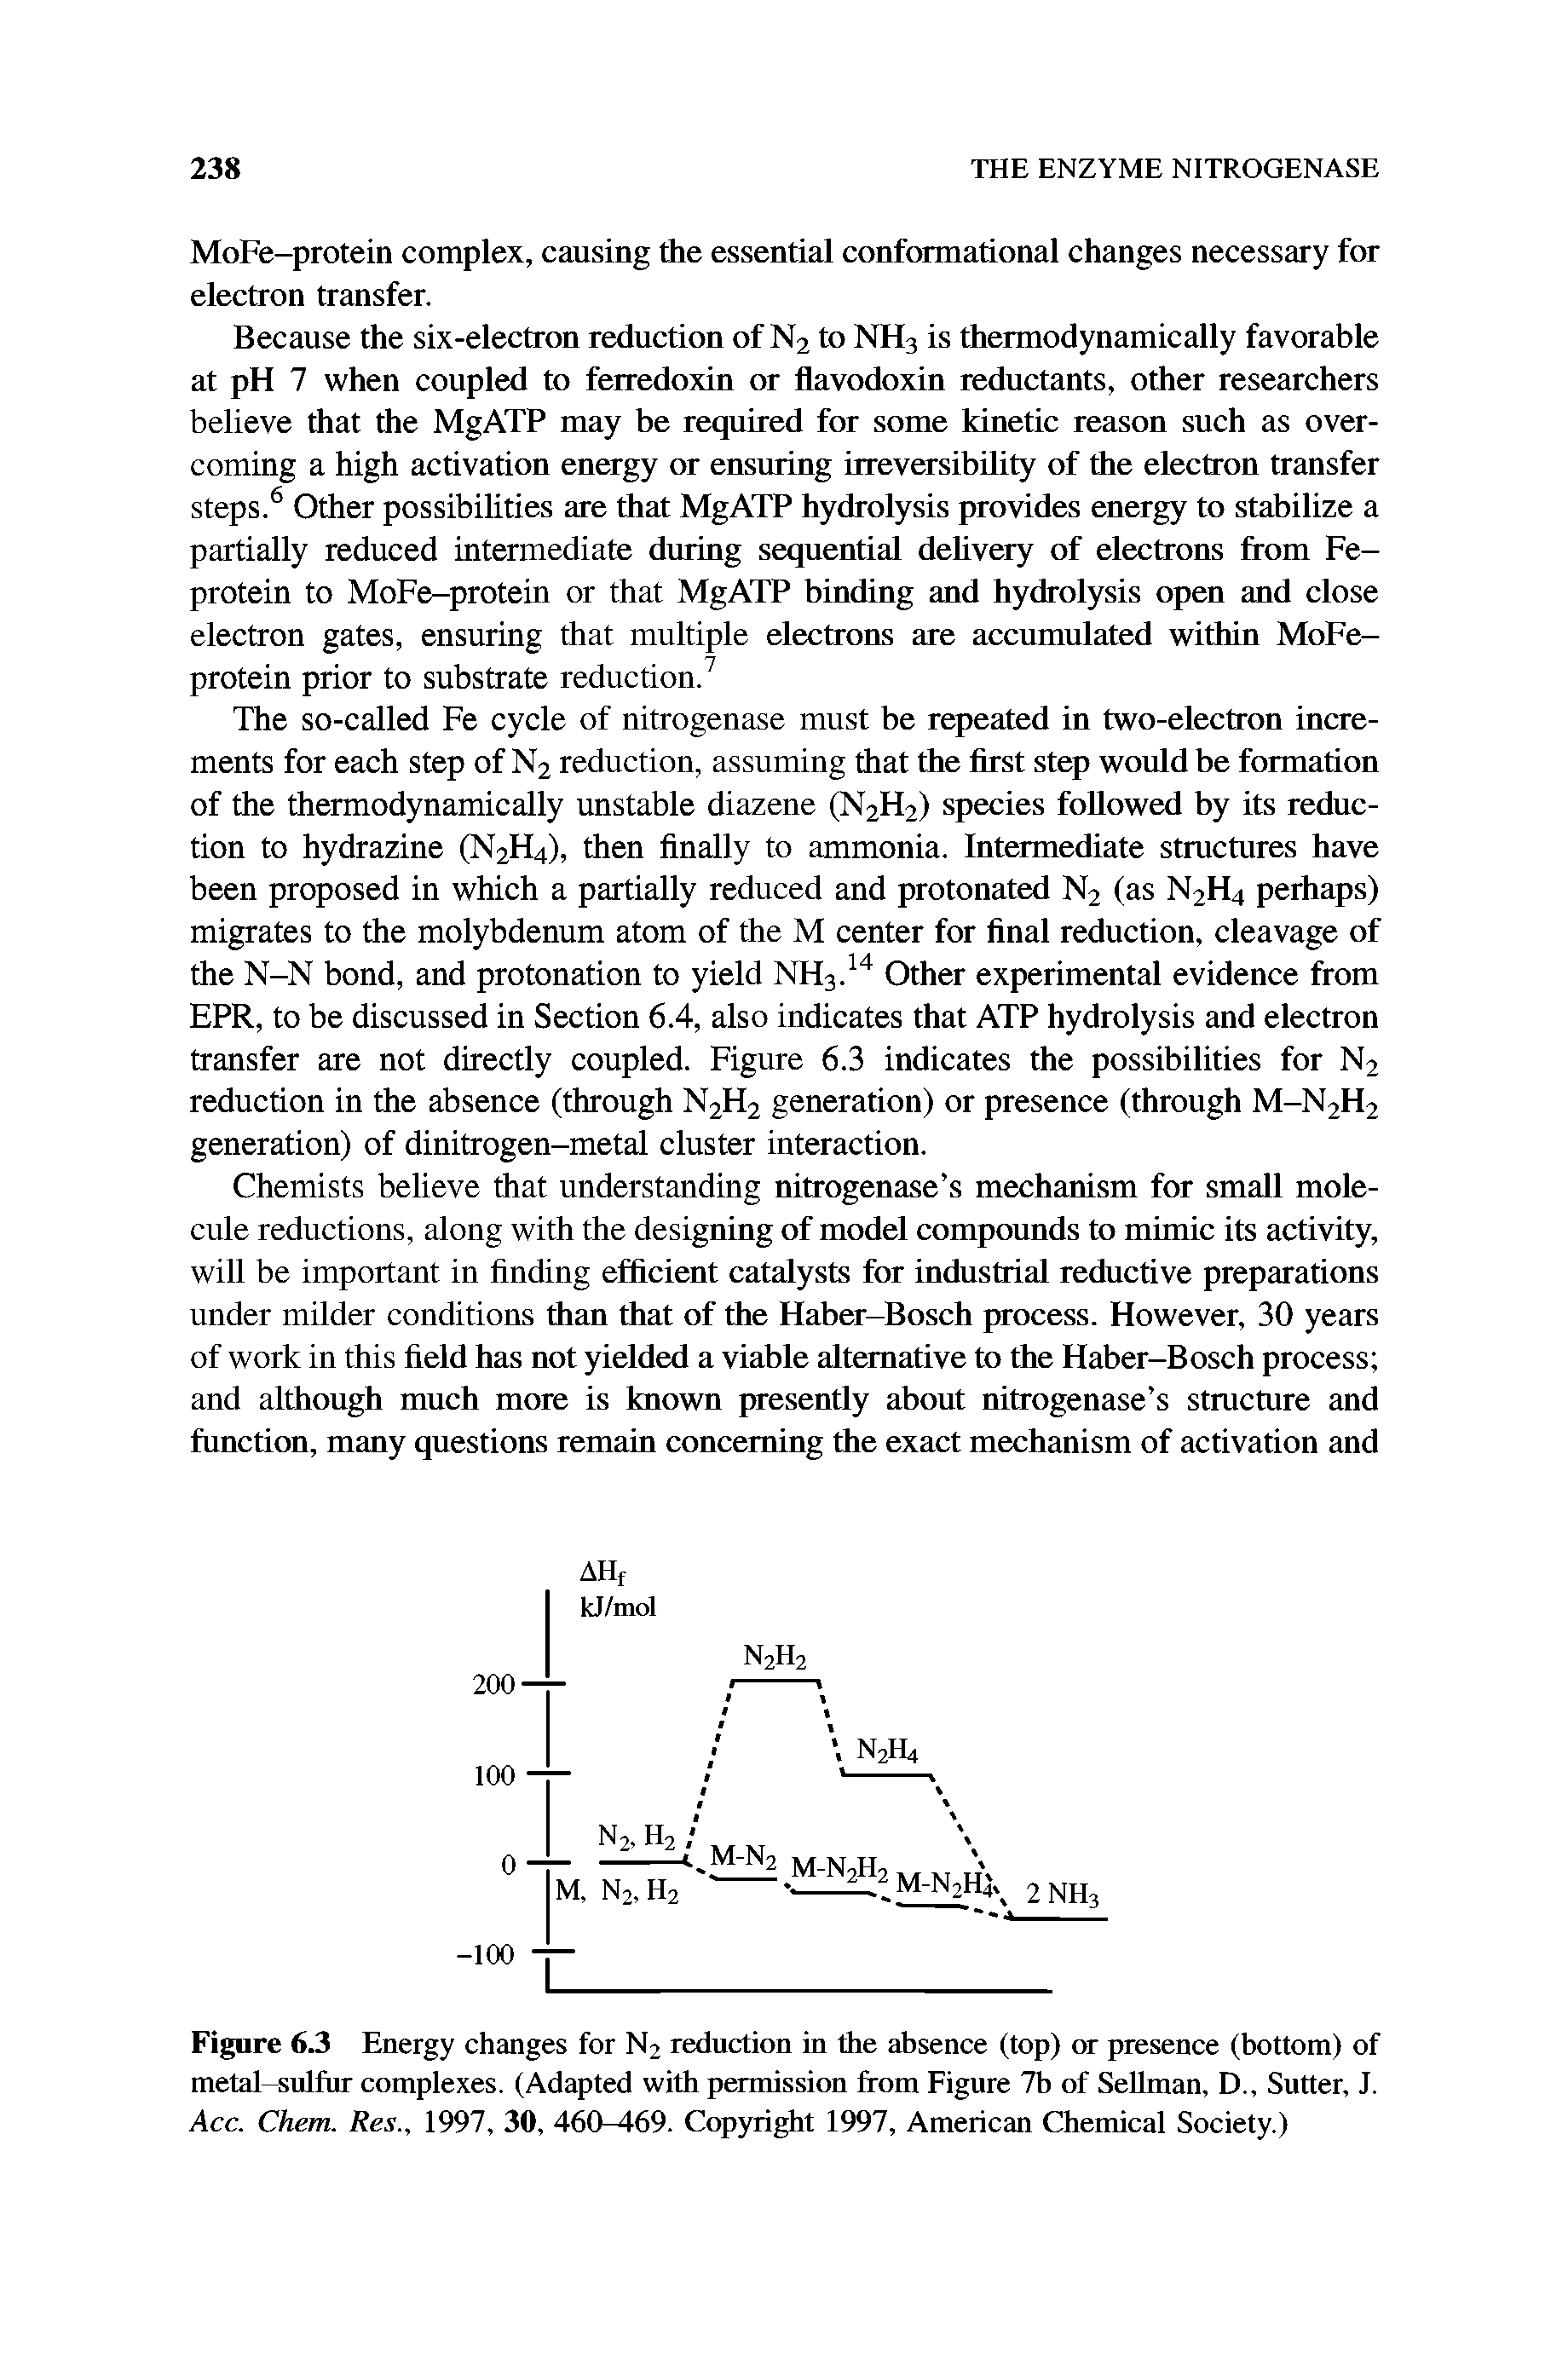 Figure 6.3 Energy changes for N2 reduction in the absence (top) or presence (bottom) of metal-sulfur complexes. (Adapted with permission from Figure 7b of Sellman, D., Sutter, J. Acc. Chem. Res., 1997, 30, 460-469. Copyright 1997, American Chemical Society.)...